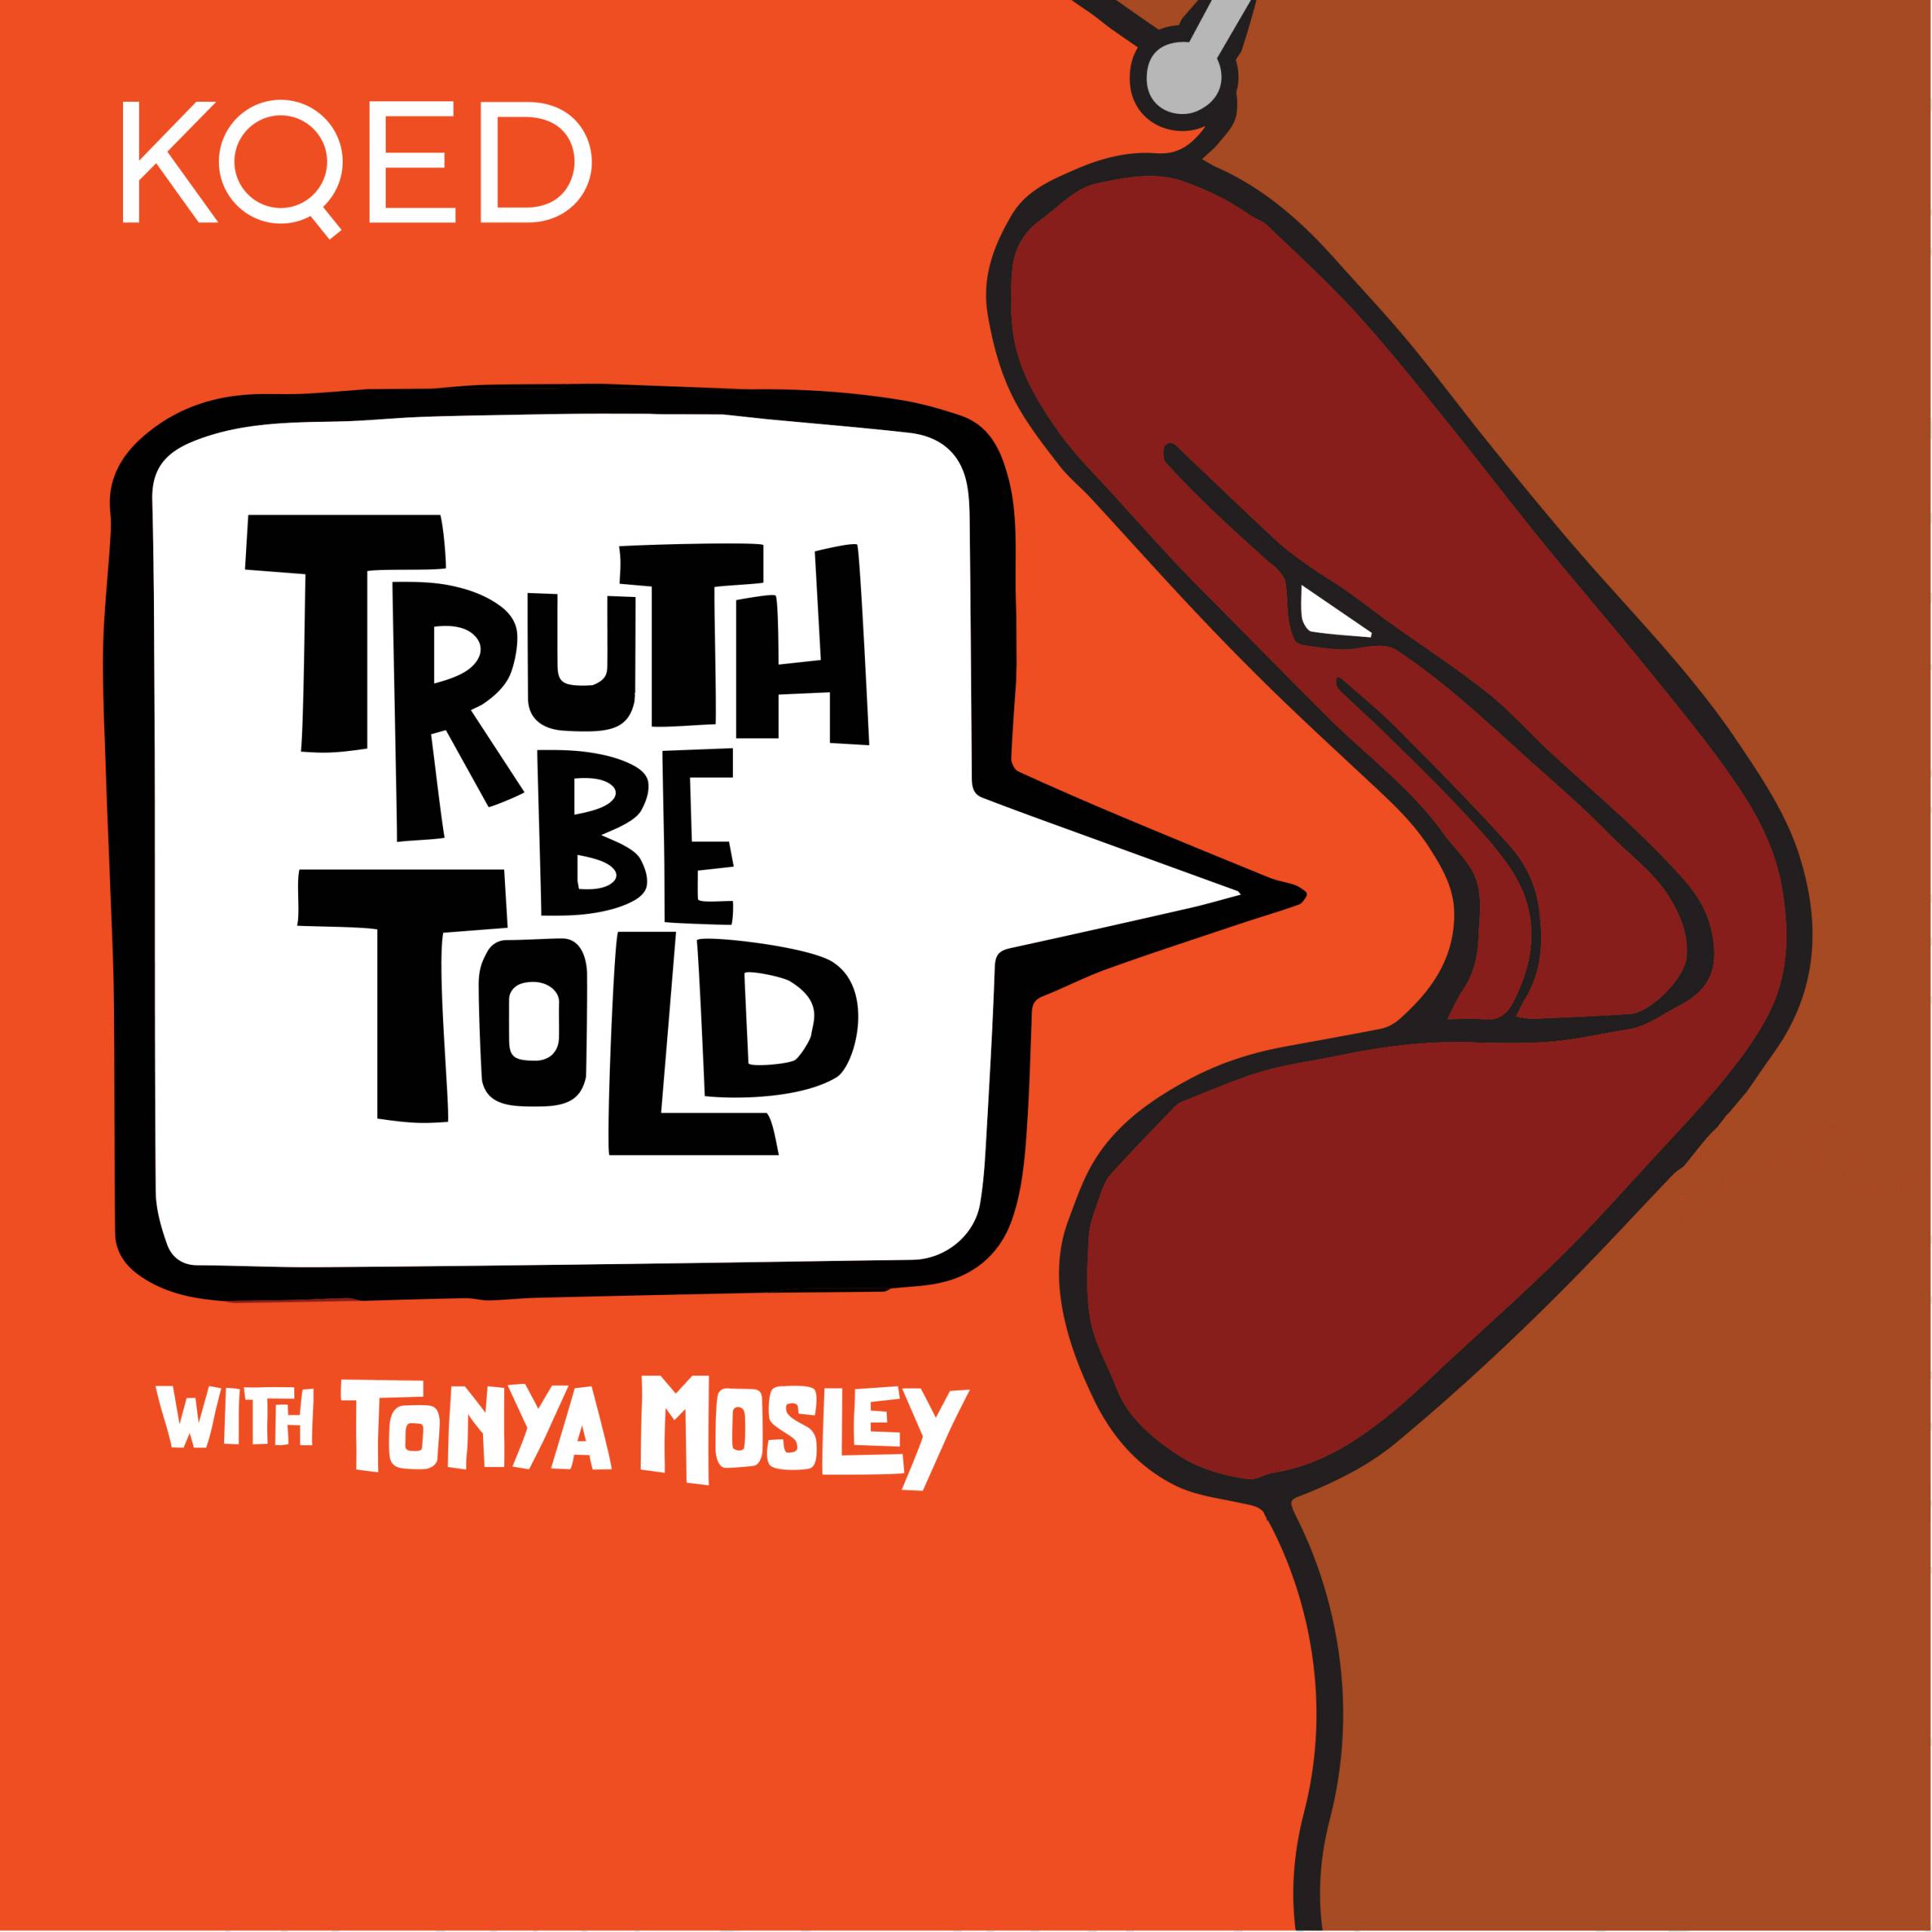 KQED Truth Be Told with Tonya Mosley